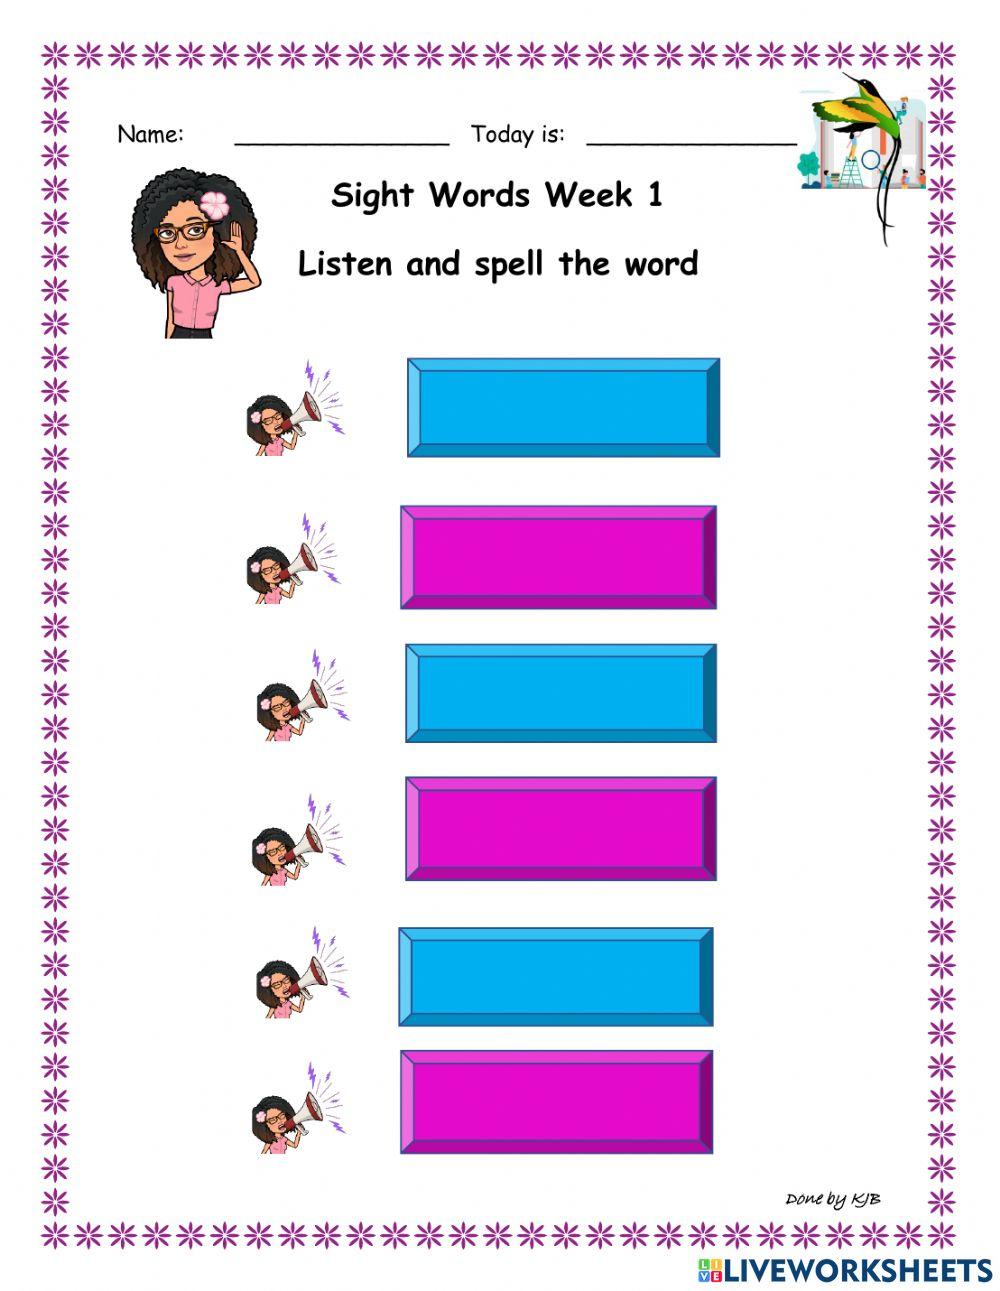 Listen and Identify Sight Words Week 1